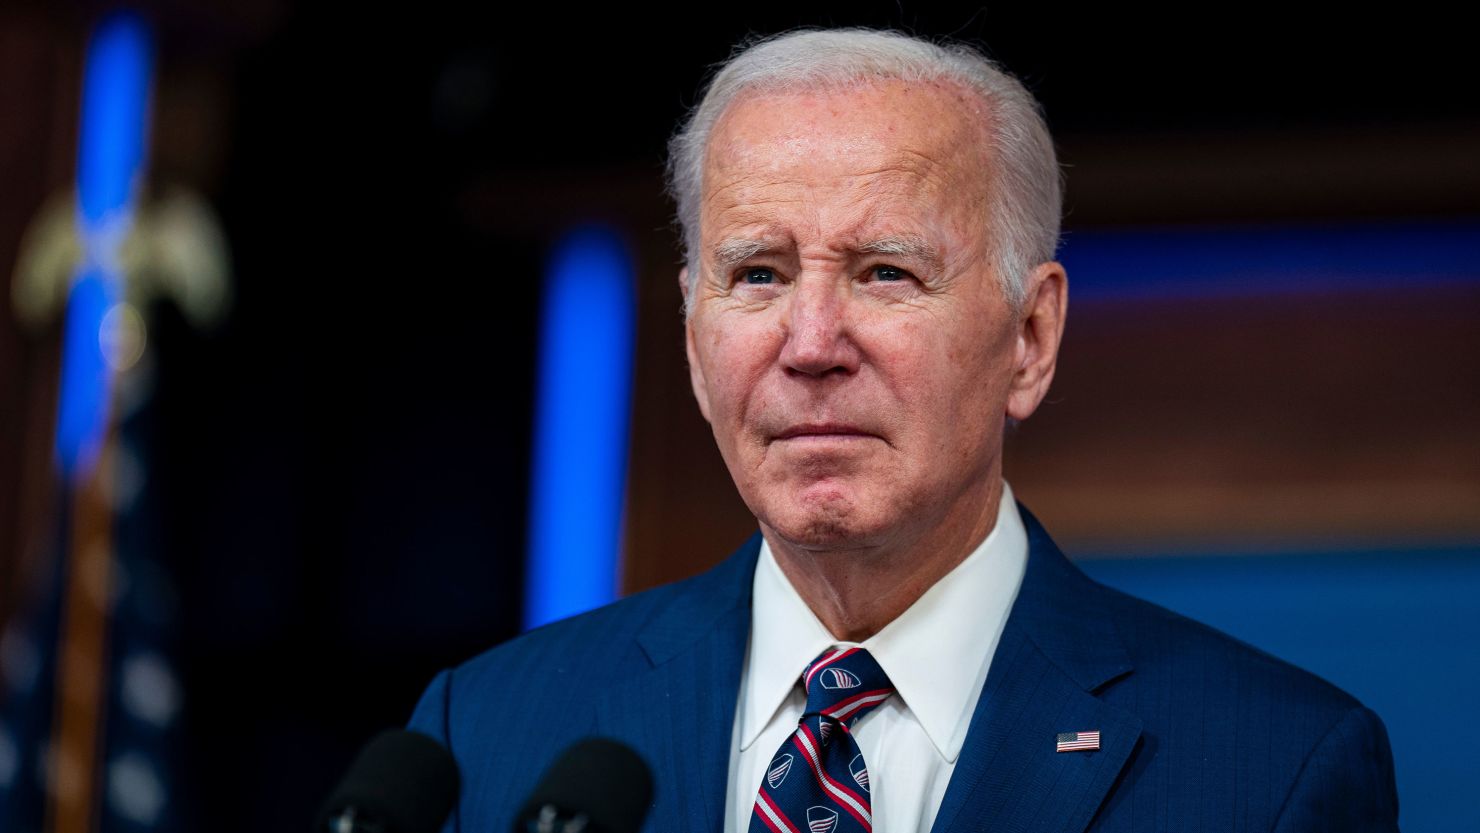 Critics charge political concerns have led Biden administration to